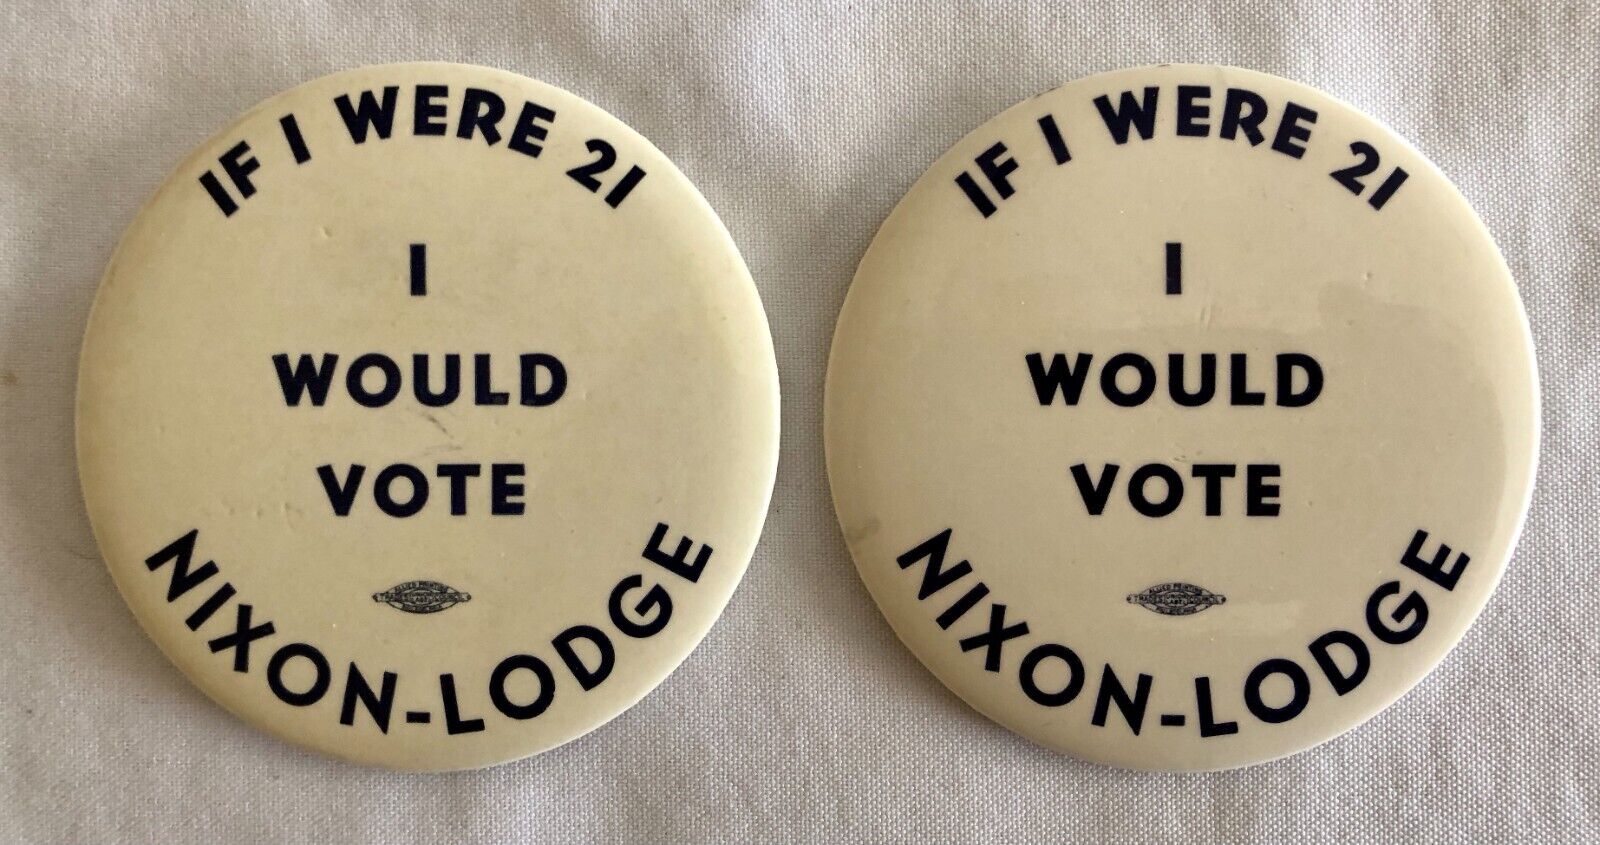 NIXON 1960 TWO DIFFERENT BACKINGS ON SAME DESIGN CAMPAIGN BUTTONS 